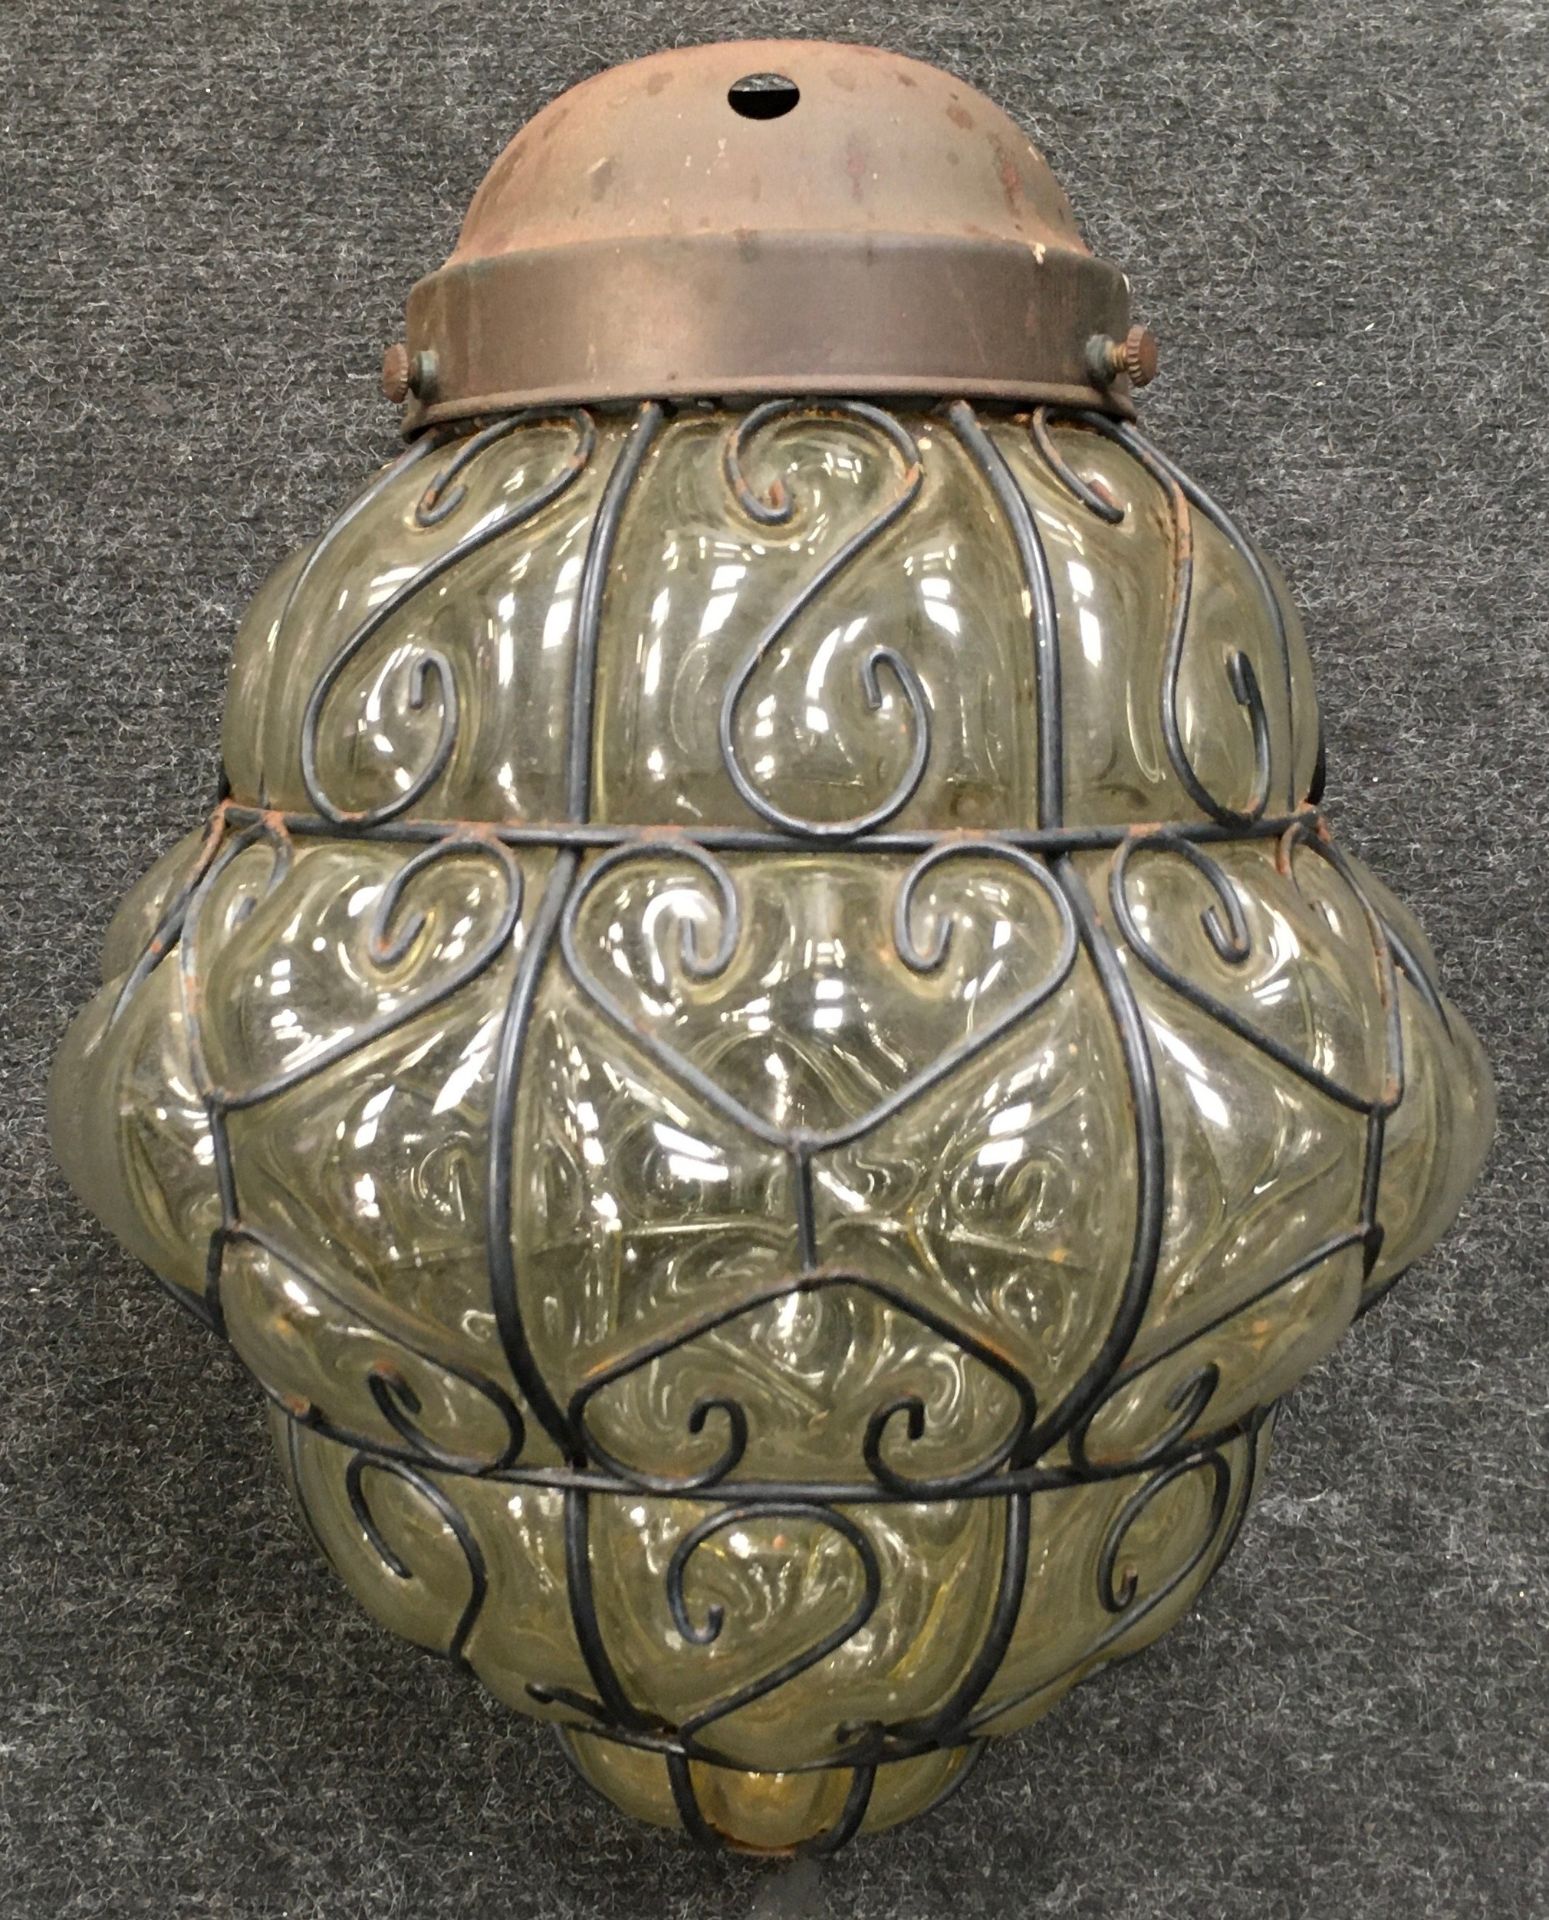 Vintage ornate wrought iron and moulded glass porch lamp shade c/w original gallery. Approx 10" tall